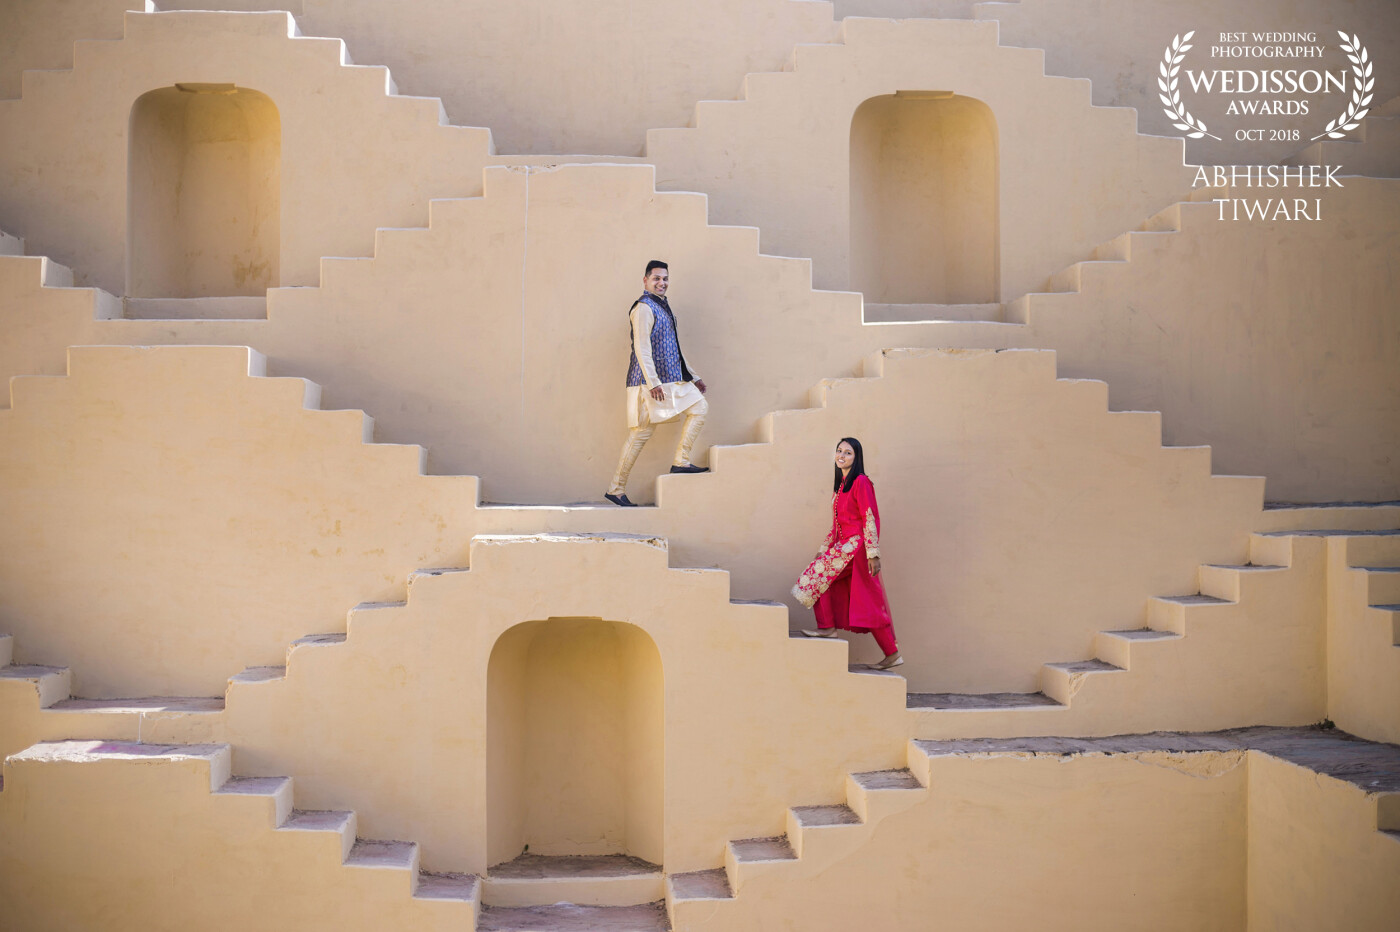 This shot was taken on the geometric staircases of the Panna Meena Ka Kund -  a sixteenth century step-well located on Jaipur. In the picture Ridhish is wearing a traditional Indian attire and walking up on the higher stairs of the eight storey stepwell while Chandni, dressed in a red traditional suit is on the lower stairs. Although they're both standing apart, their body movements are coordinated and they are facing the camera and smiling. This aspect along with the criss-cross stair patterns, that although situated away have a certainty of arrangement within, sets this picture apart from other traditional wedding photographs where intimacy between the couple is encouraged. 